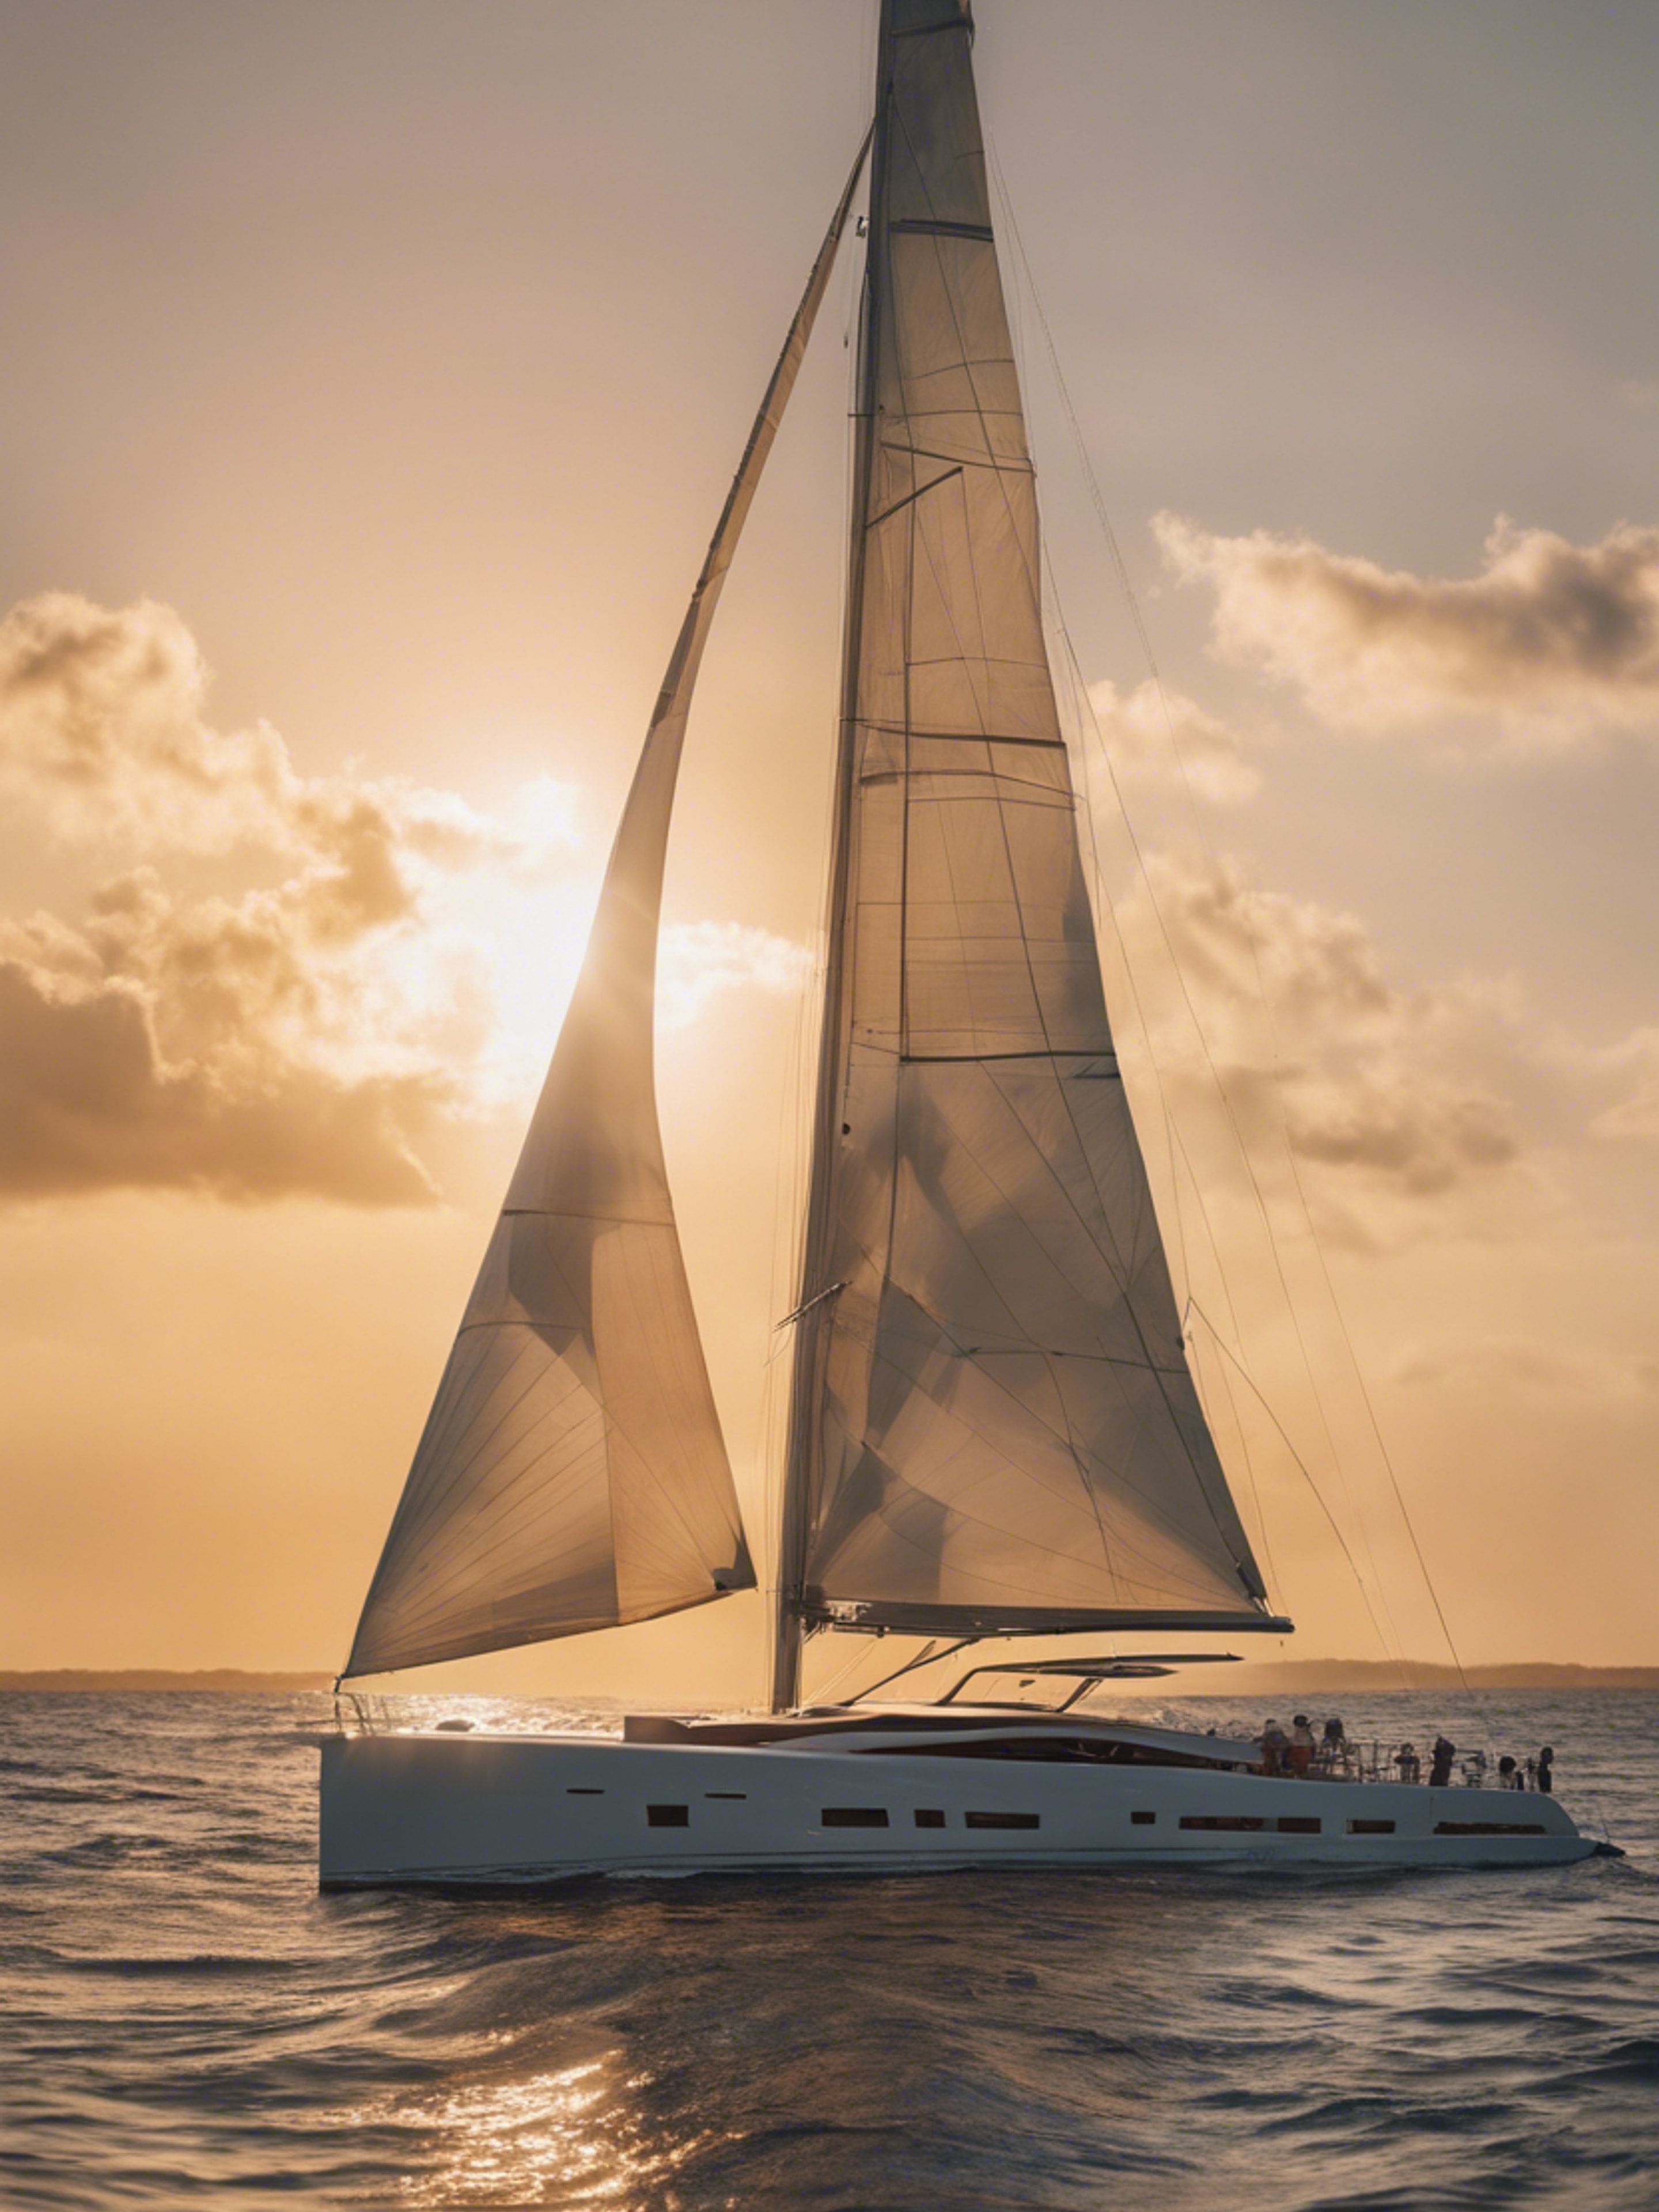 A luxury yacht sailing off the coast of Palm Beach, with a sunset casting golden hues over the ocean.壁紙[9decced1d7dc4afd8ebc]